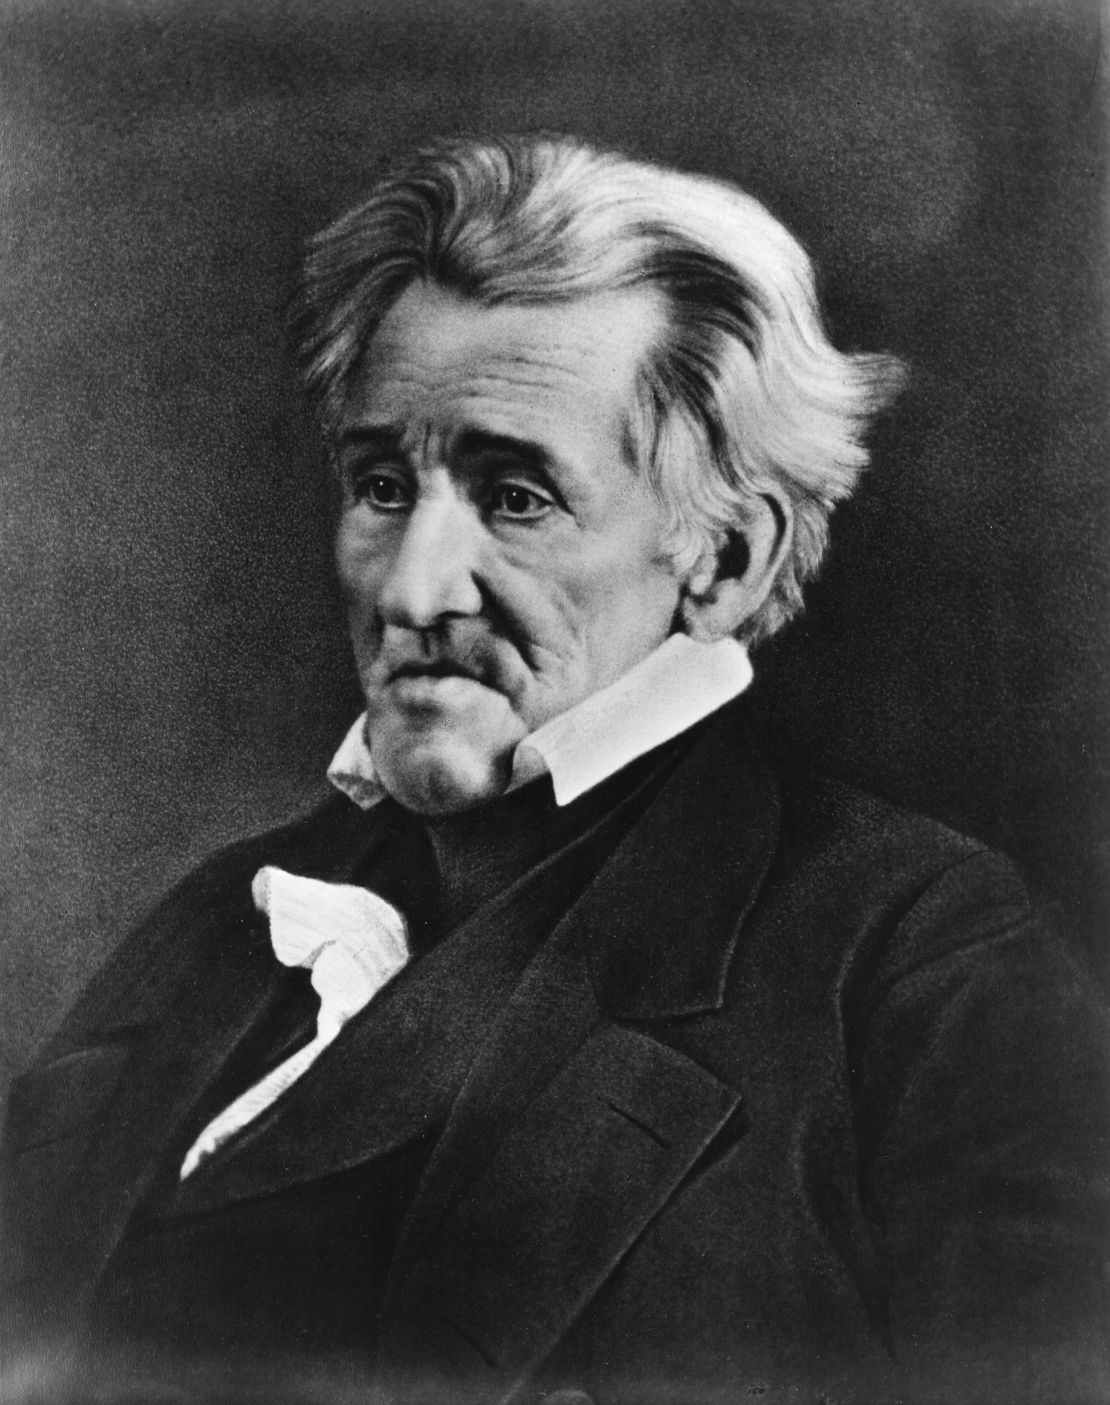 circa 1844: Andrew Jackson (1767 - 1845), the 7th President of the United States of America. (Photo by Library Of Congress/Getty Images)